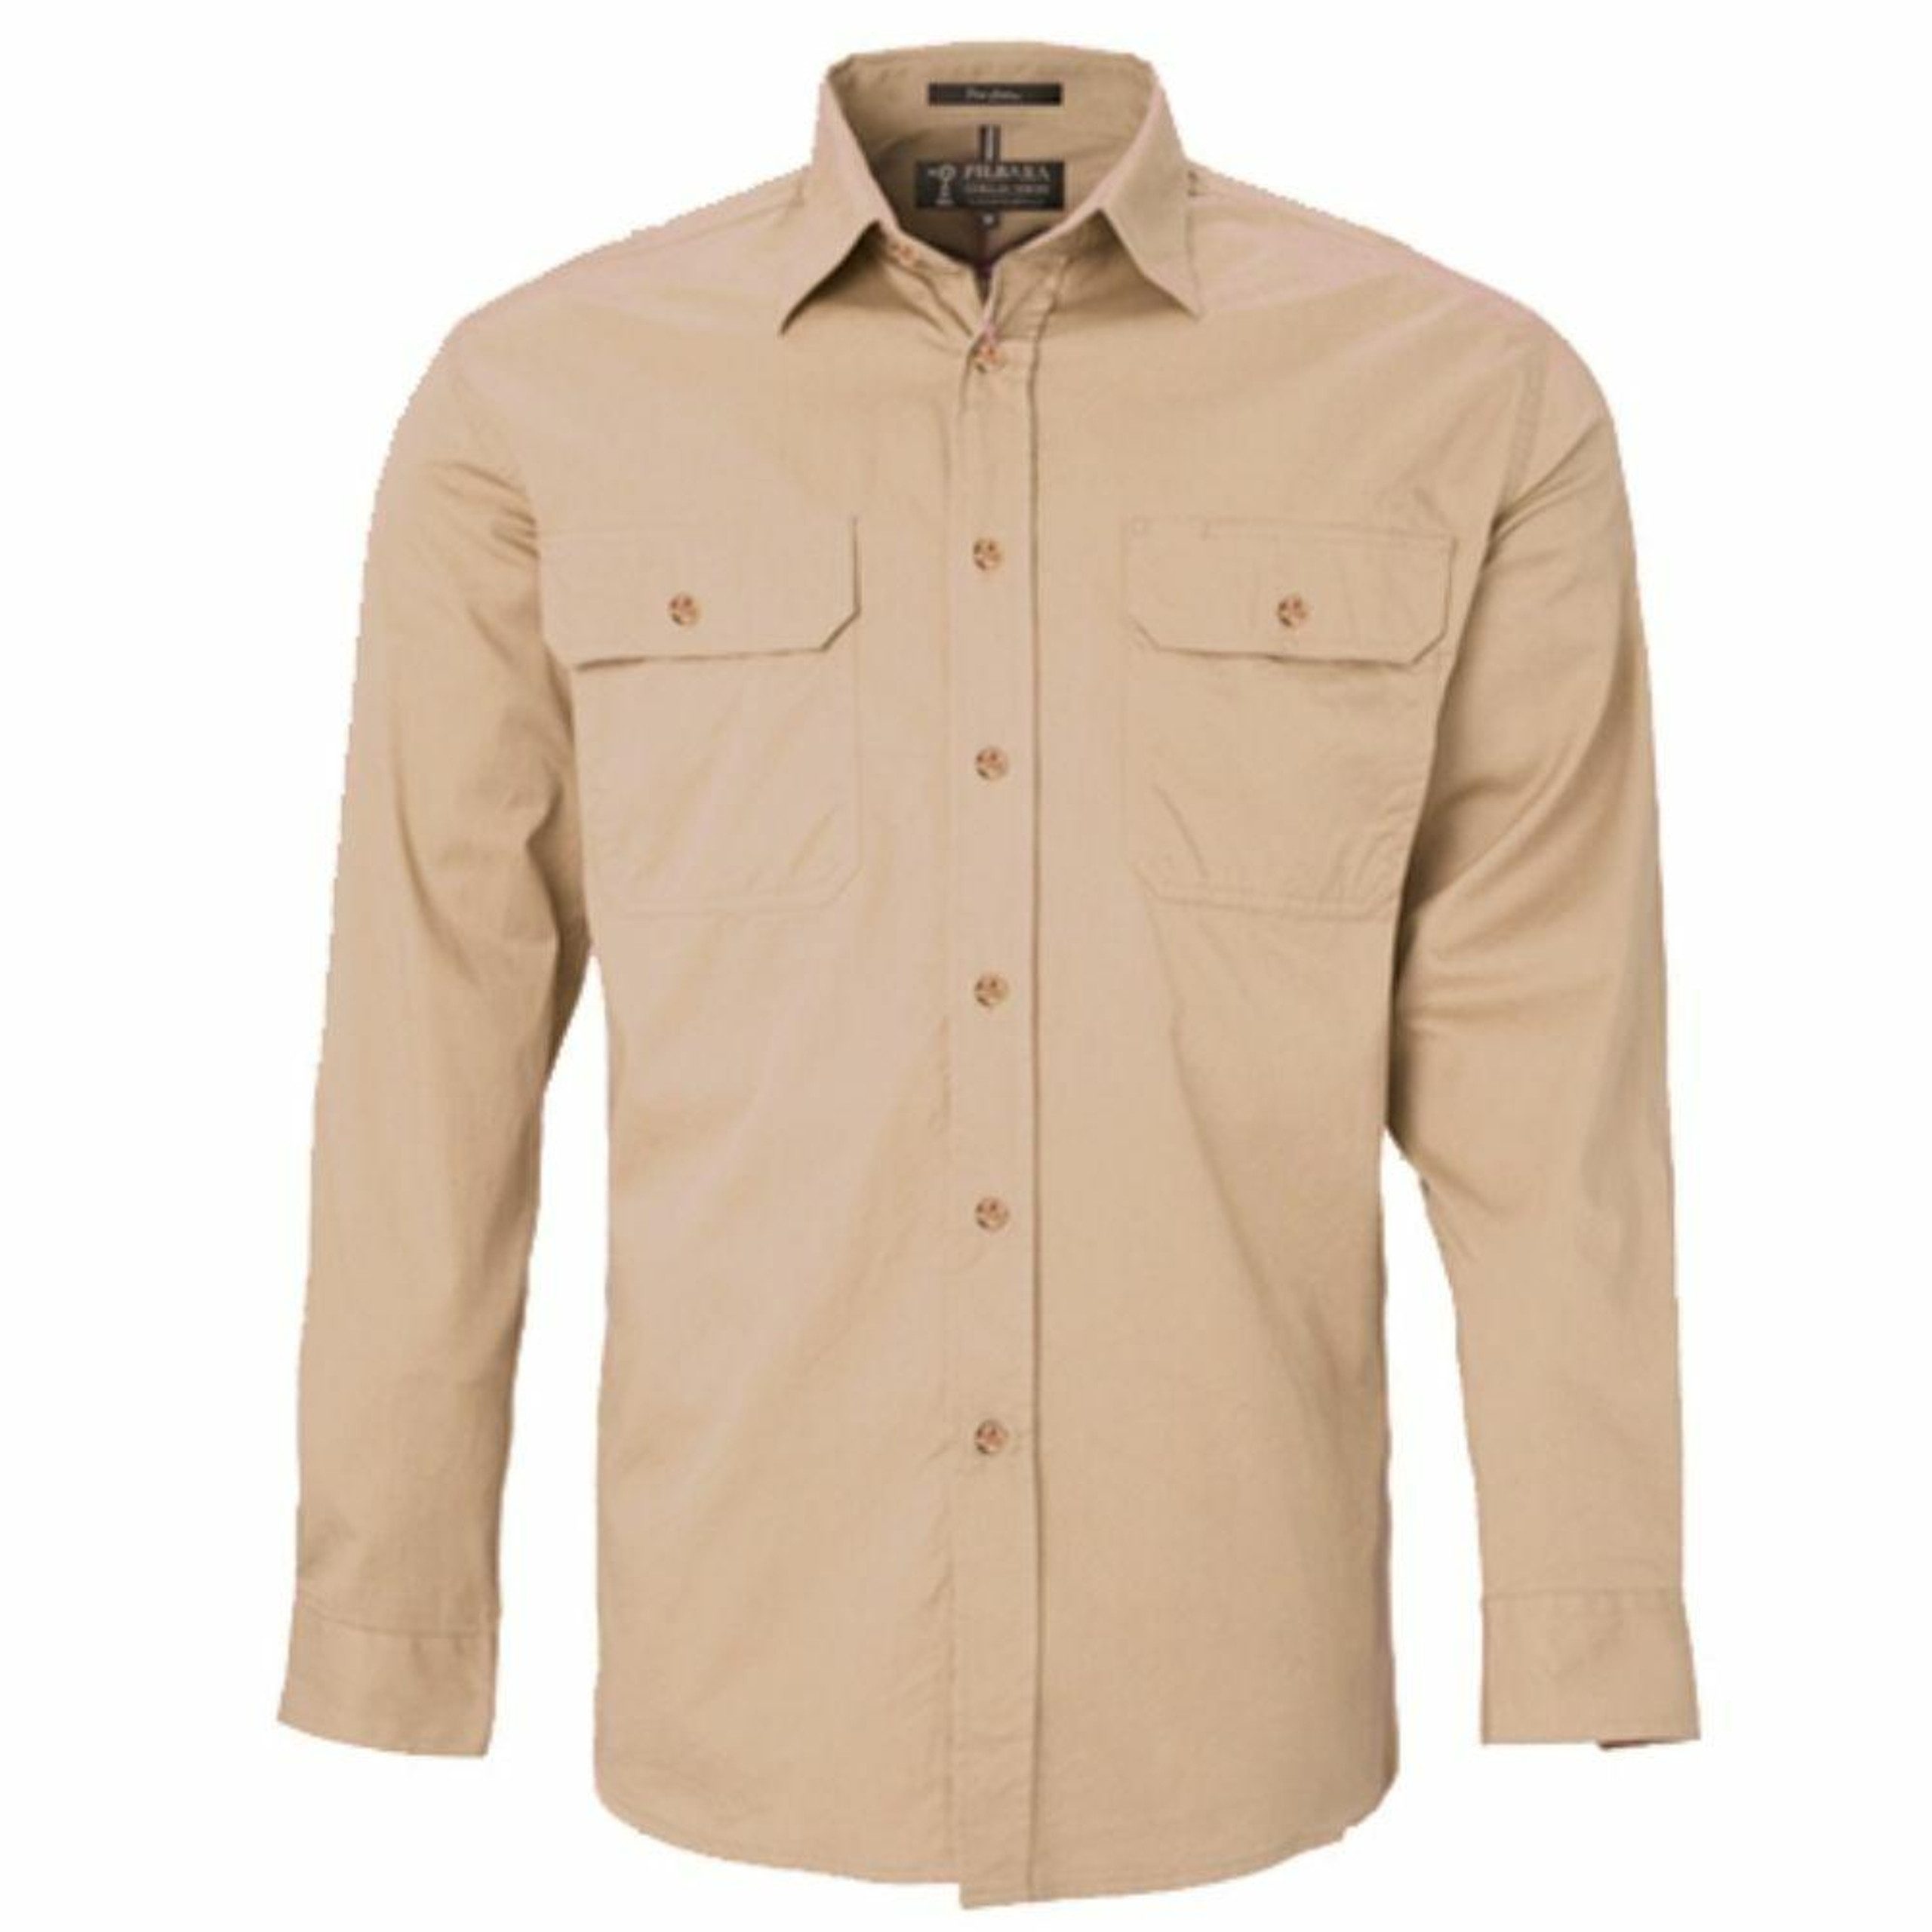 FREE EMBROIDERY - Men's Clay OPEN FRONT Shirt (buy 20+) - Golders Toowoomba